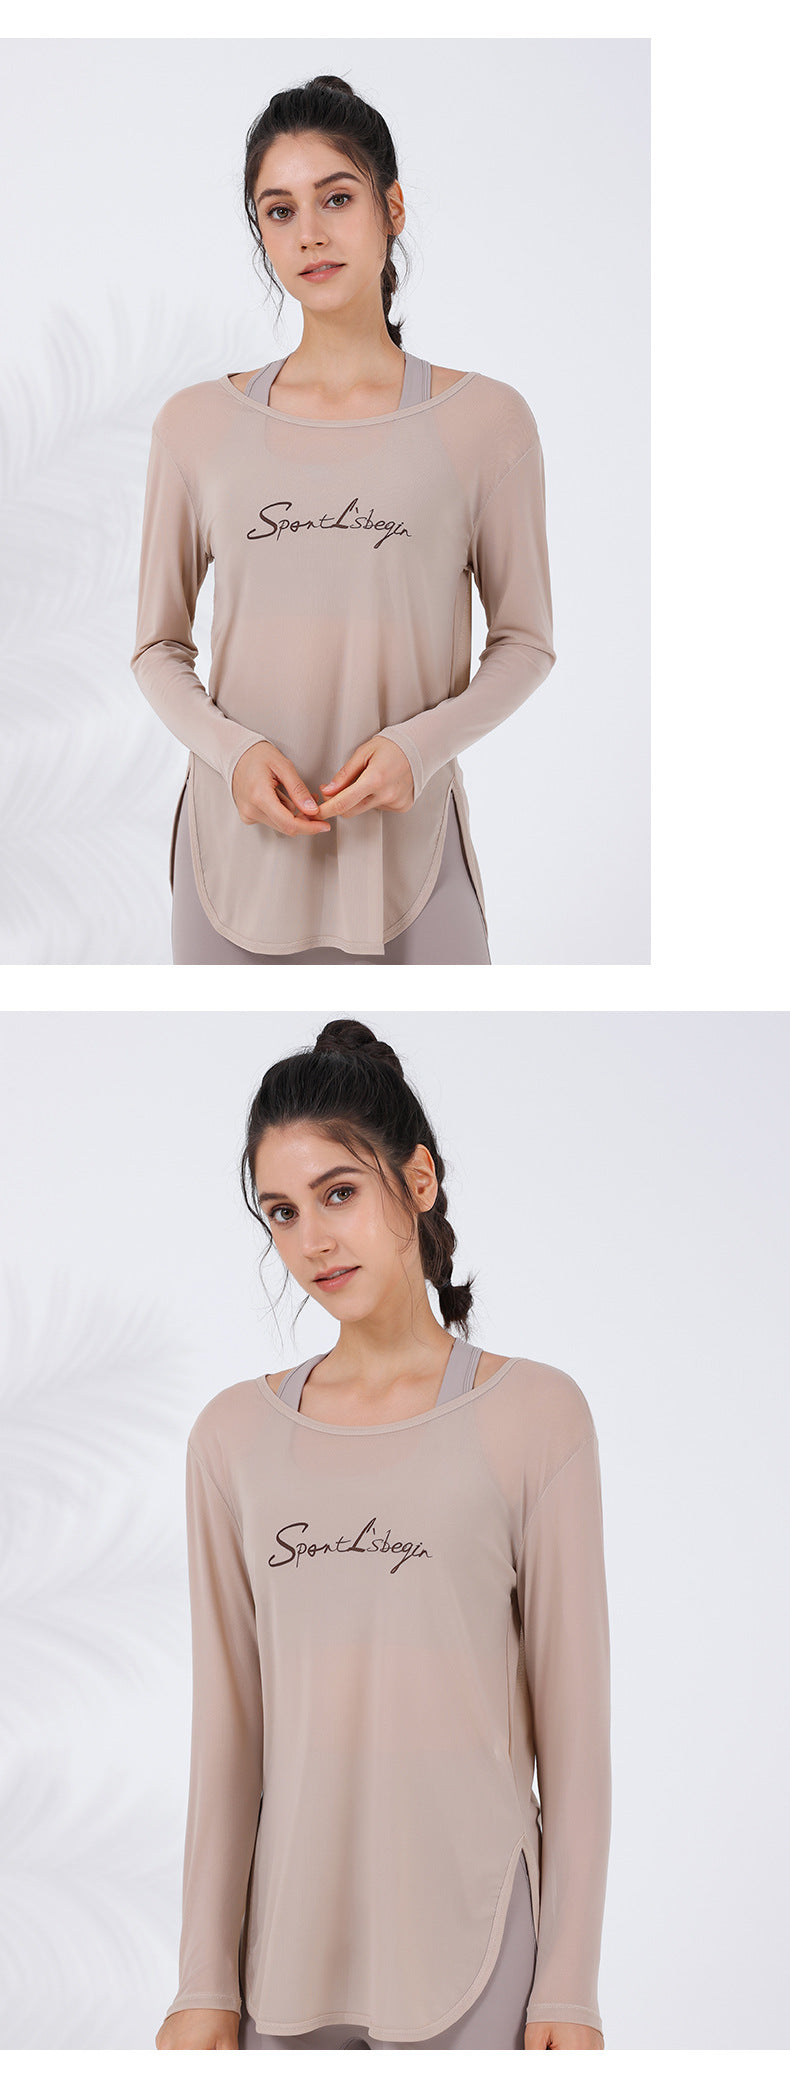 2023.09 New autumn and winter mesh breathable yoga clothes for women with side slits, U-shaped hem, butt-covering sports running fitness tops